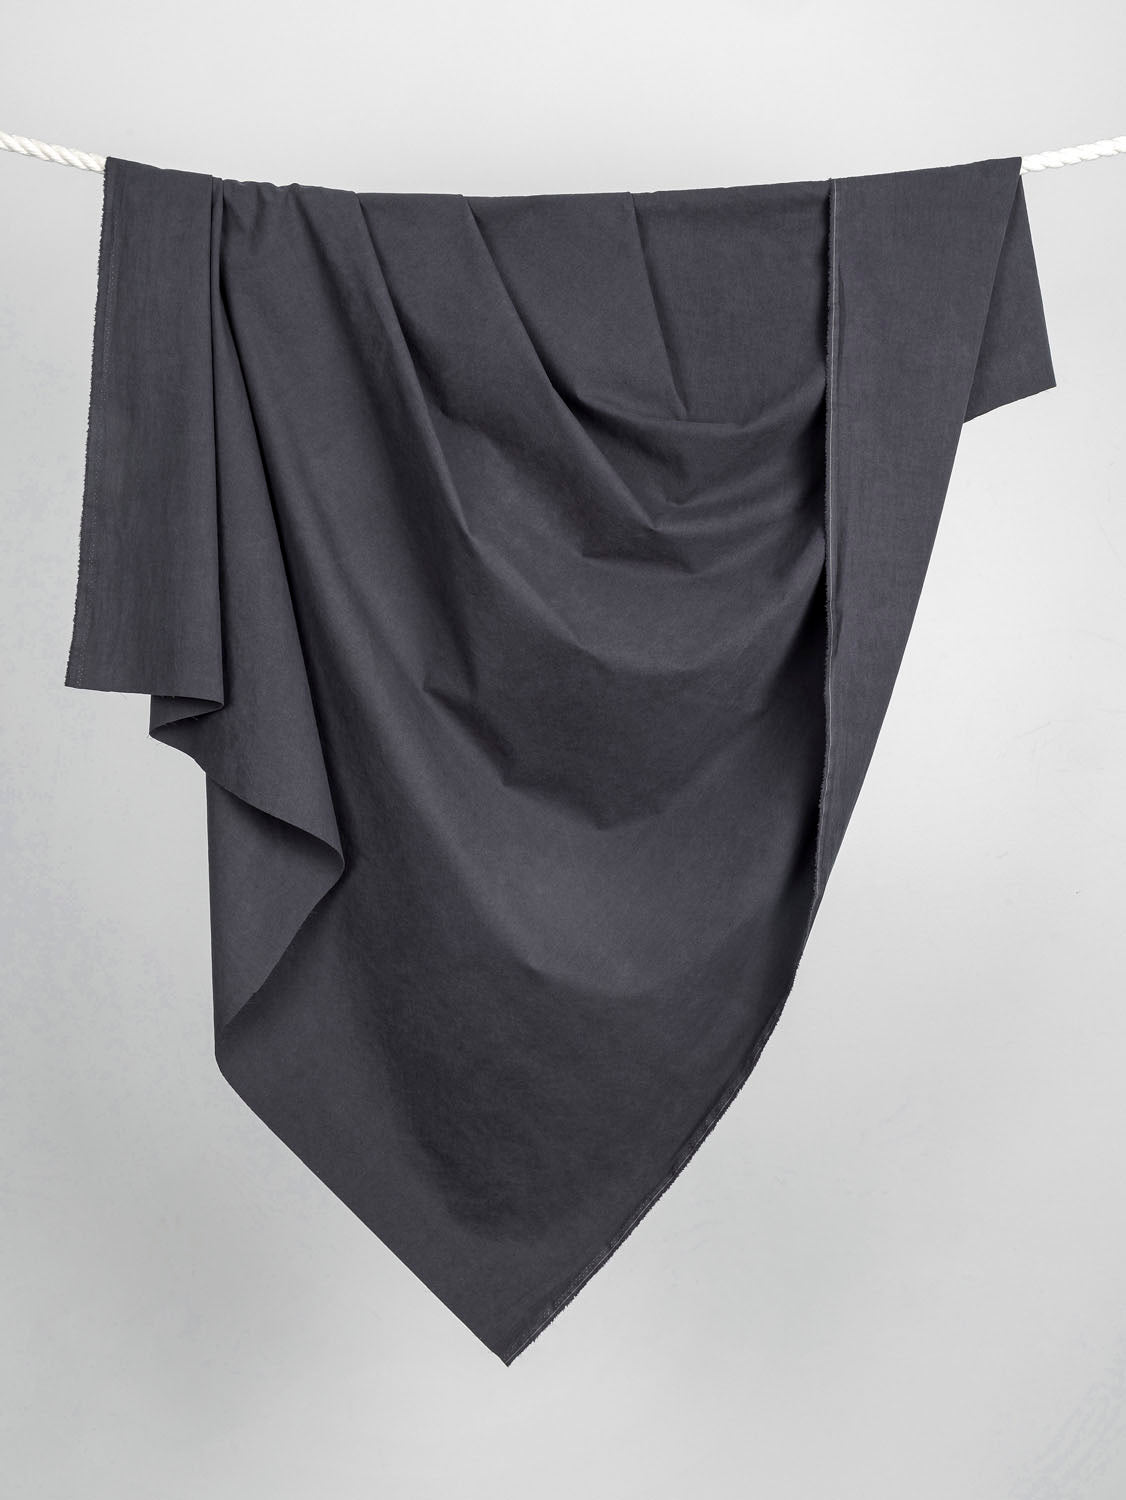 Substantial Organic Cotton Broadcloth - Black